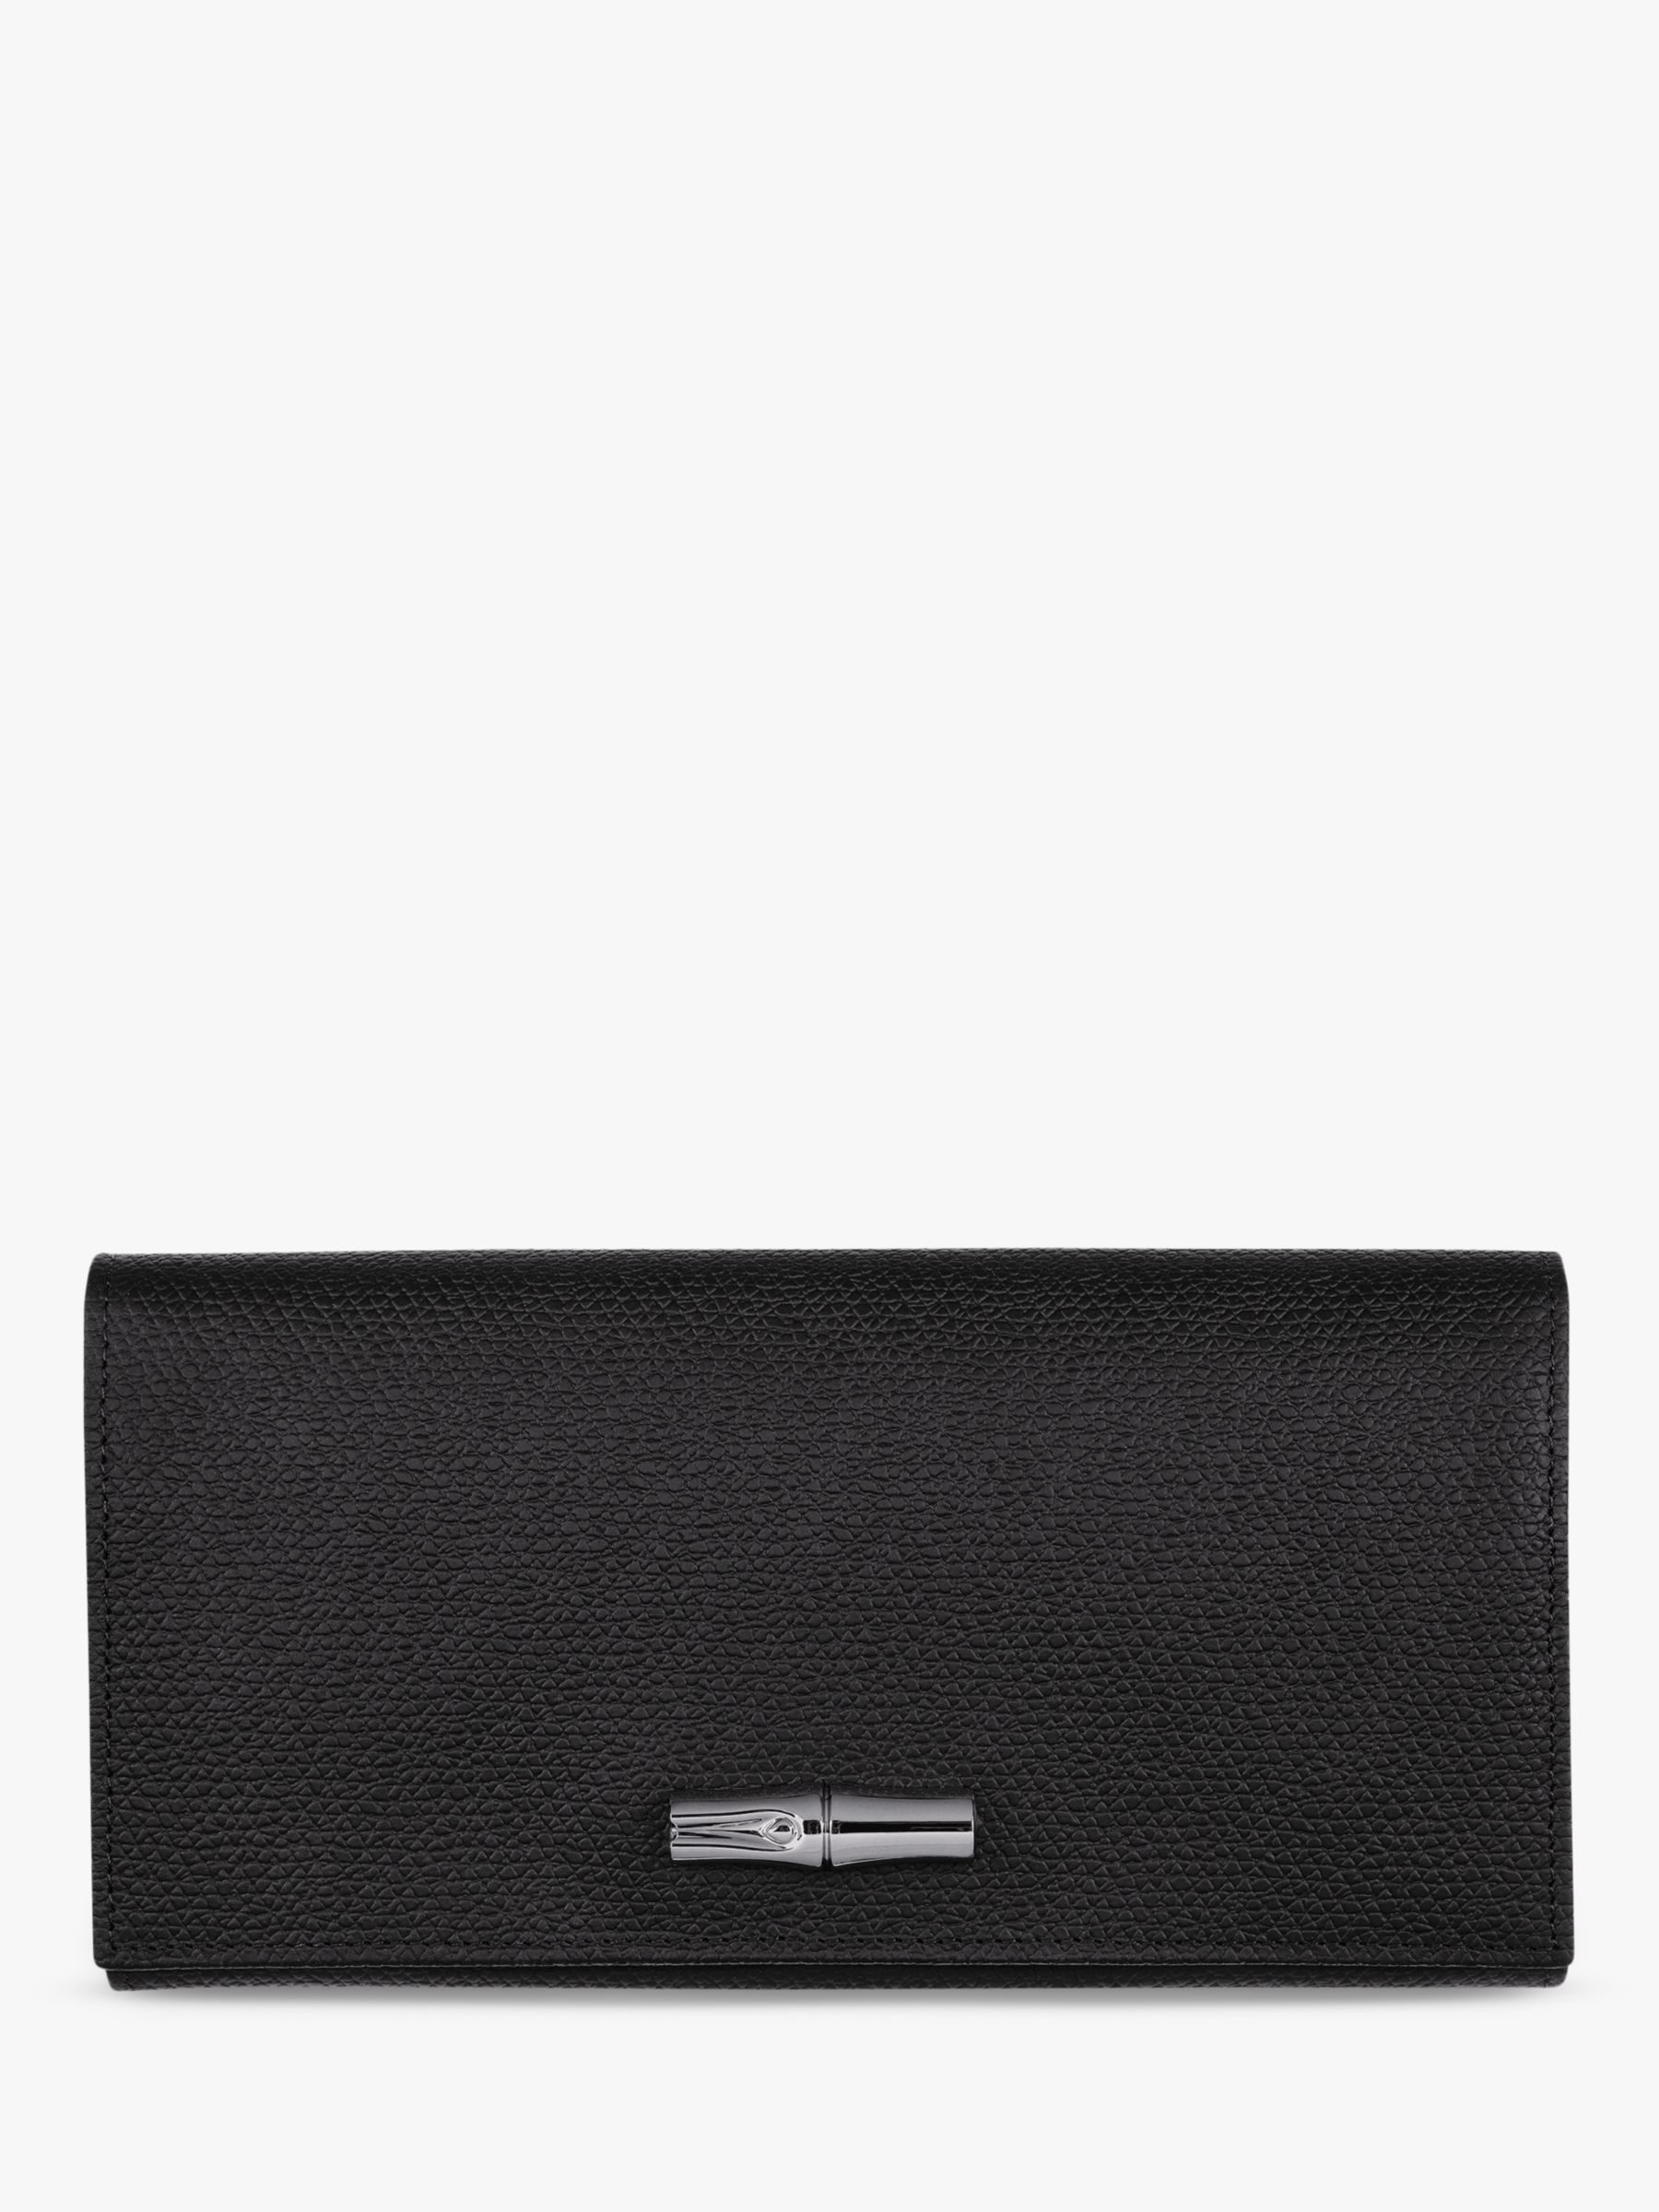 Buy Longchamp Roseau Leather Continental Wallet Online at johnlewis.com